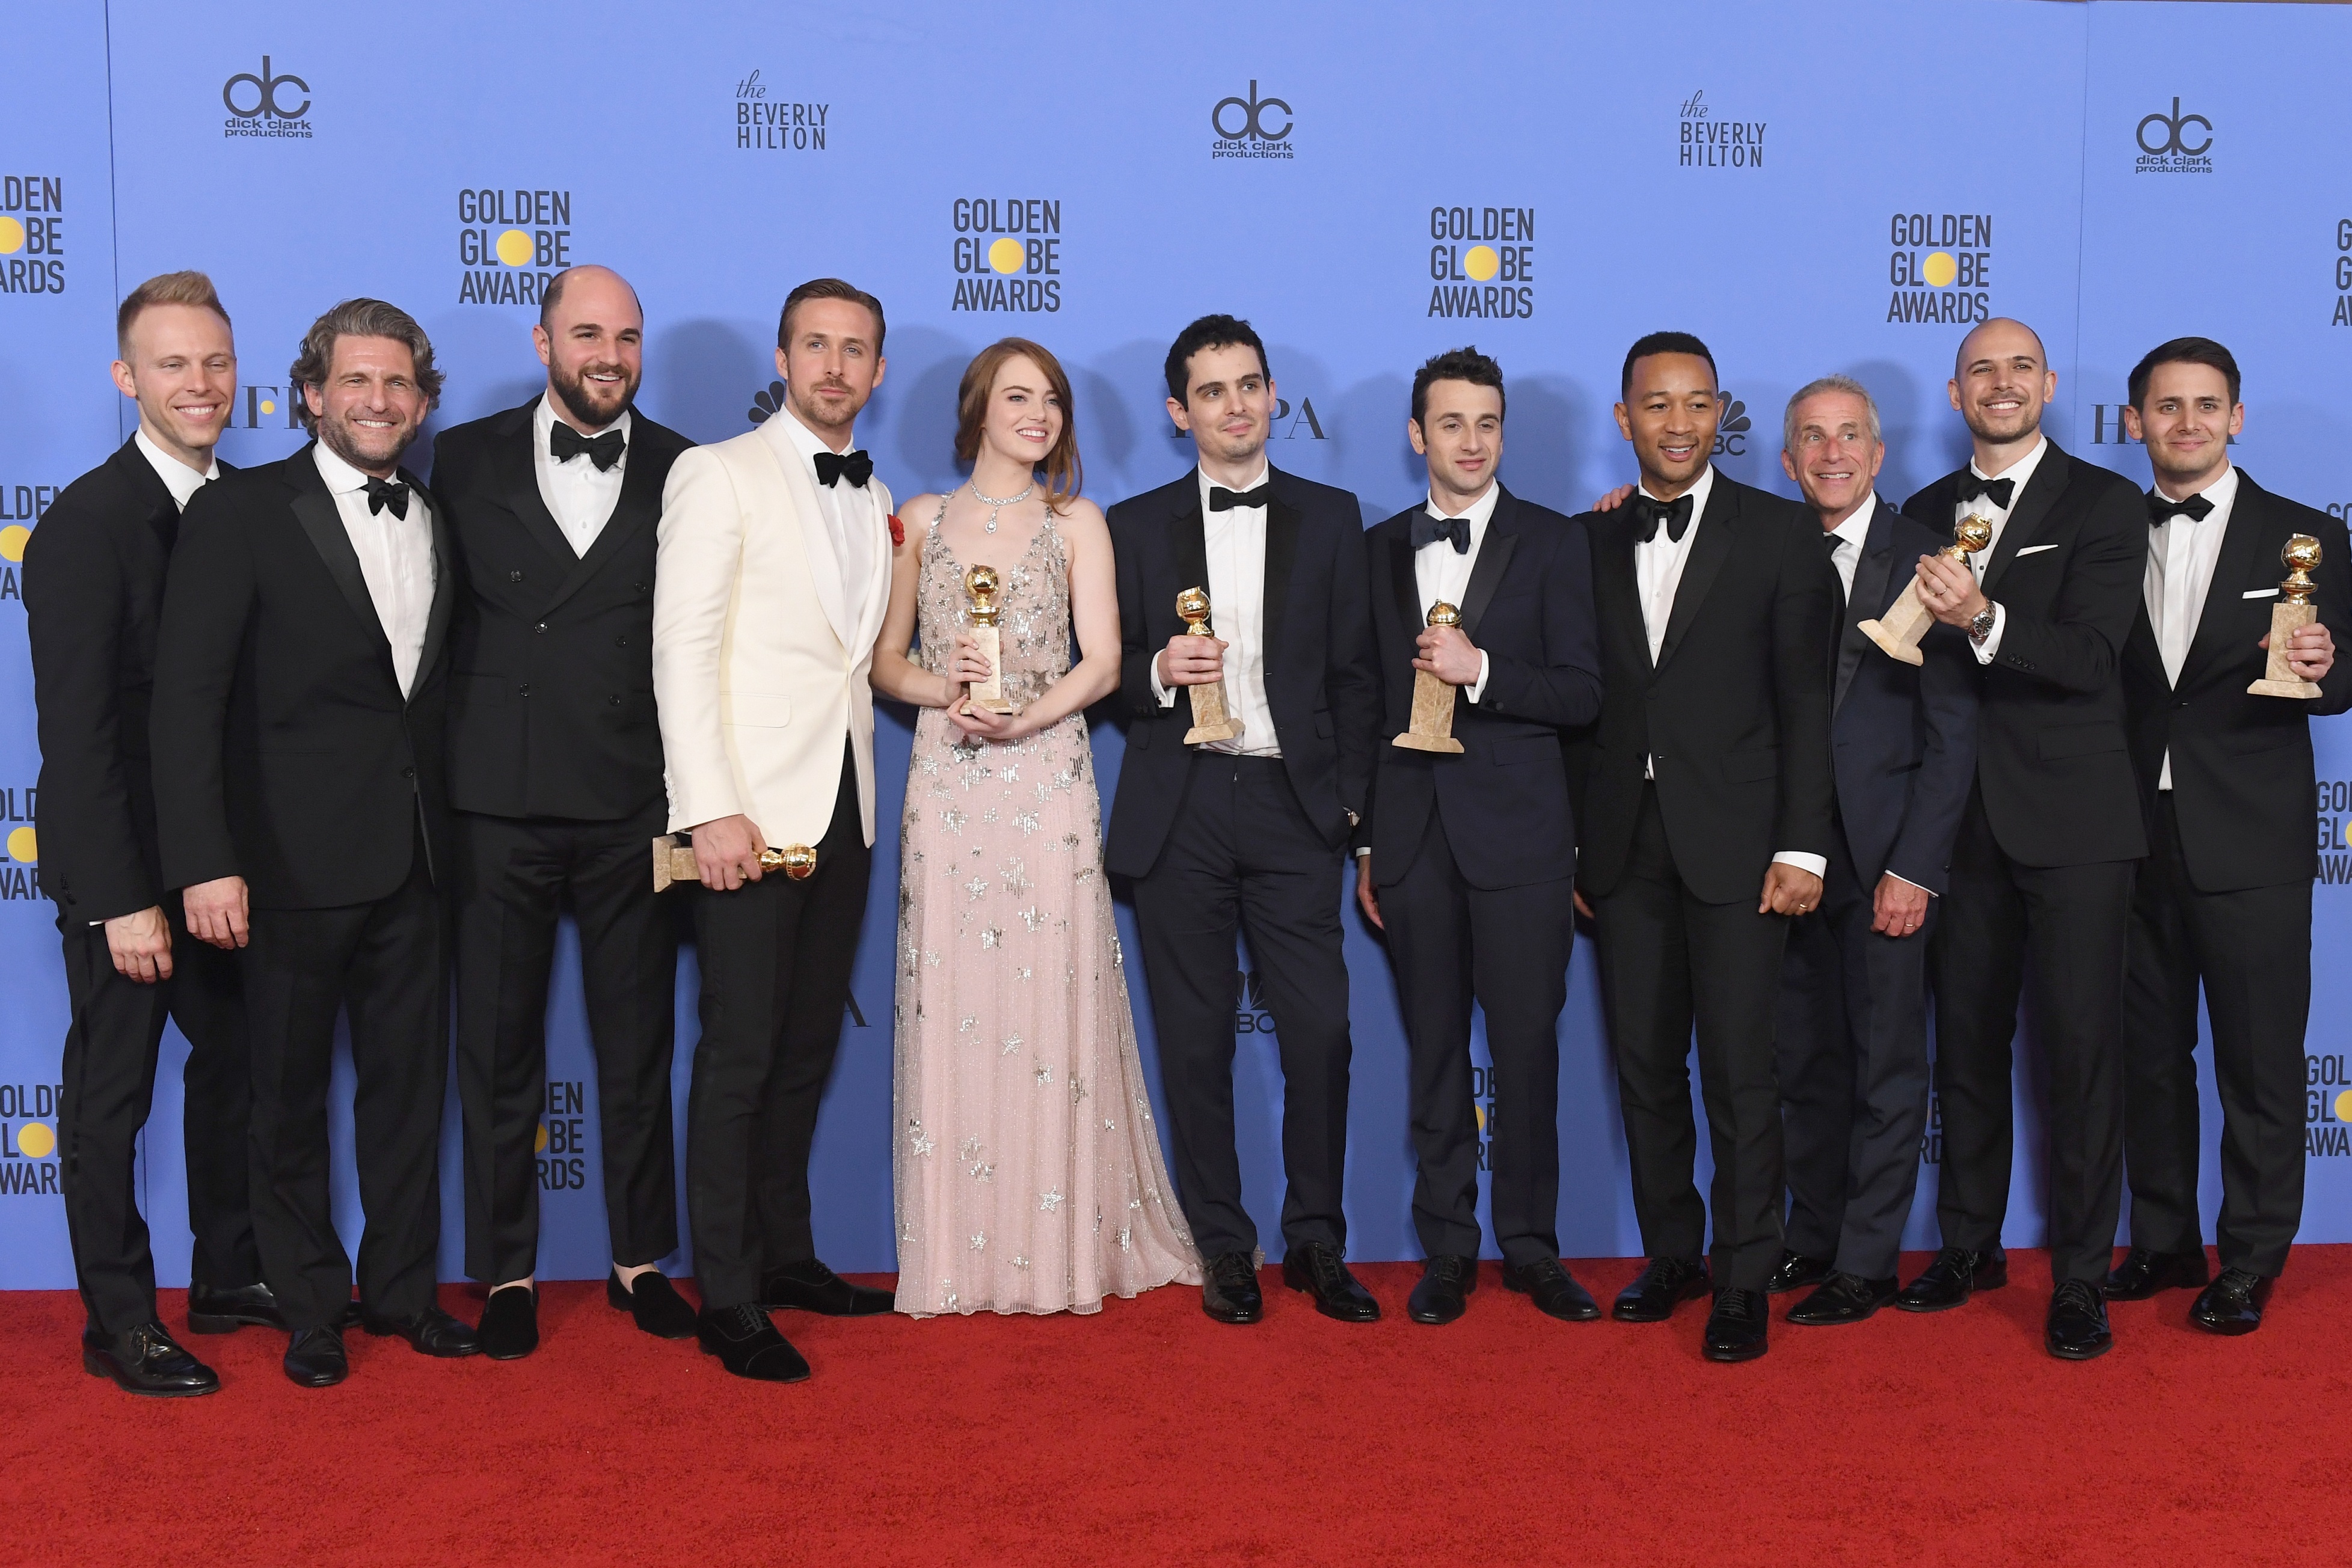 BEVERLY HILLS, CA - JANUARY 08: Cast and crew of 'La La Land,' winners of Best Motion Picture - Musical or Comedy, pose in the press room during the 74th Annual Golden Globe Awards at The Beverly Hilton Hotel on January 8, 2017 in Beverly Hills, California.   Kevin Winter/Getty Images/AFP